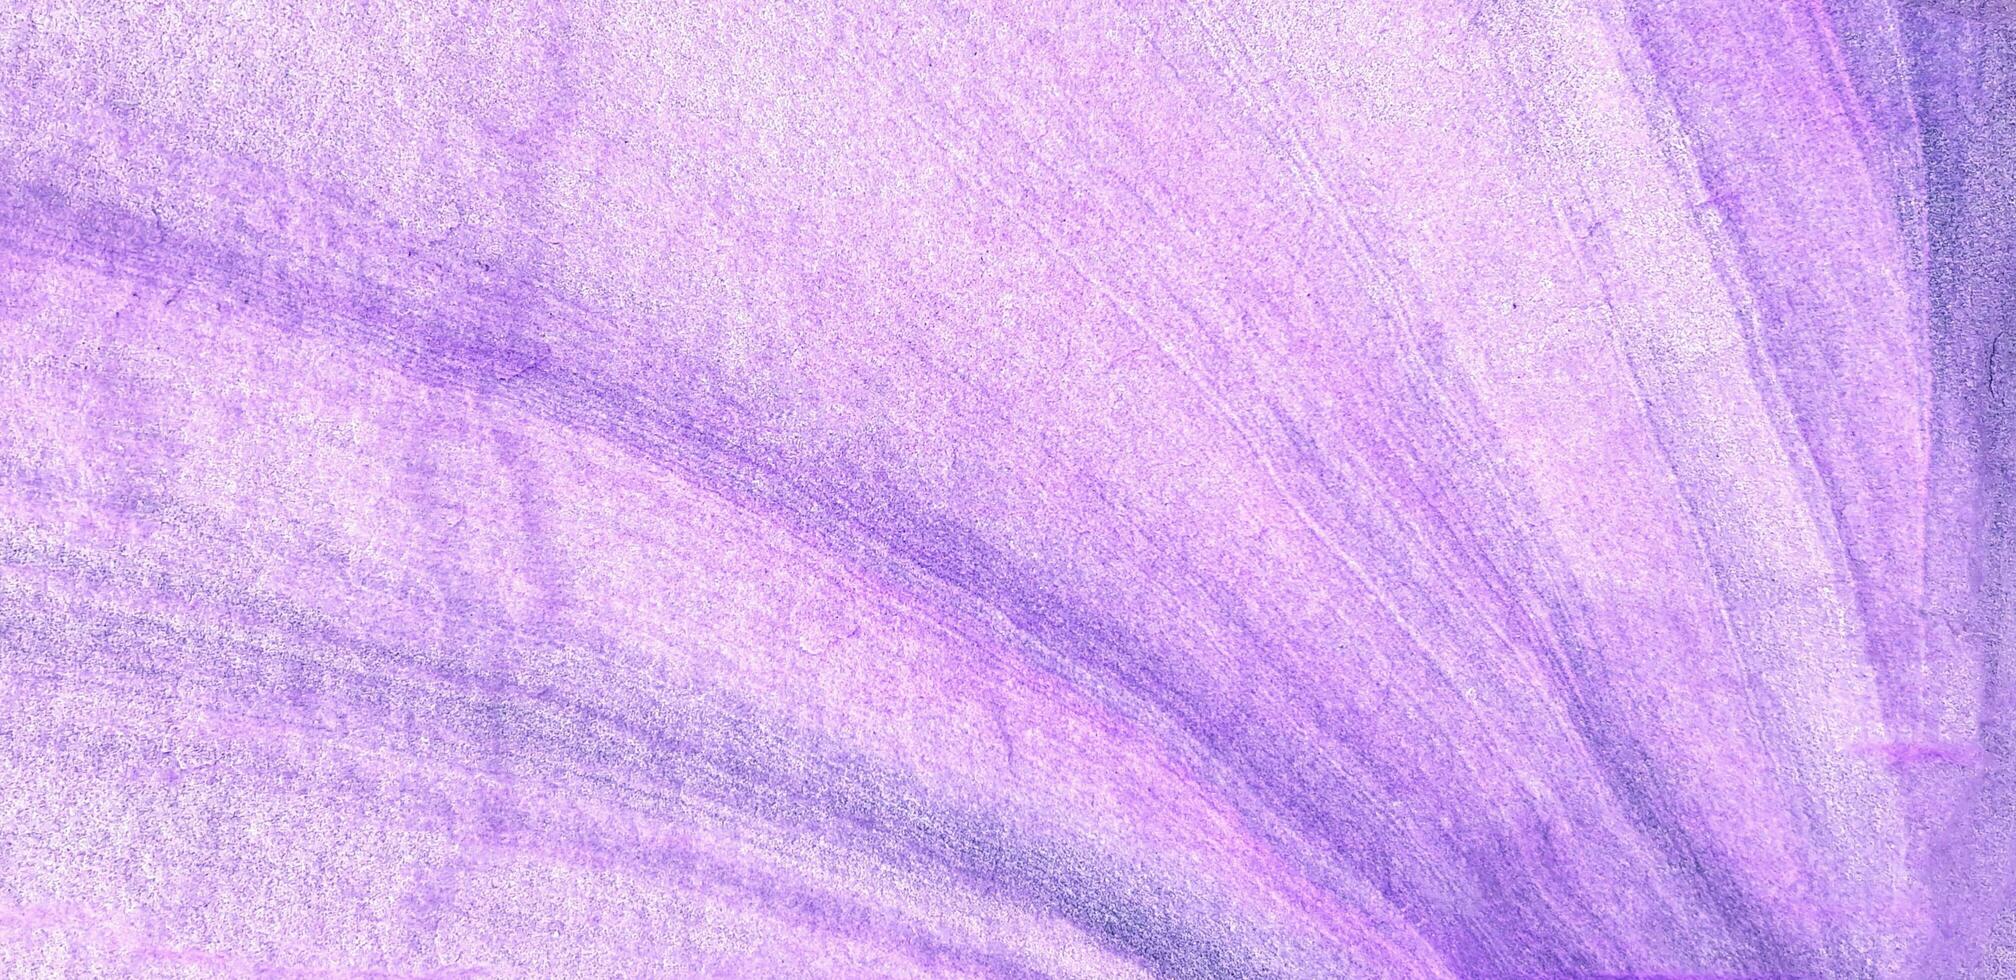 Close up surface and Textured of Rough light Violet or Purple stone wall for background. Art pattern, Wallpaper and Abstract concept photo